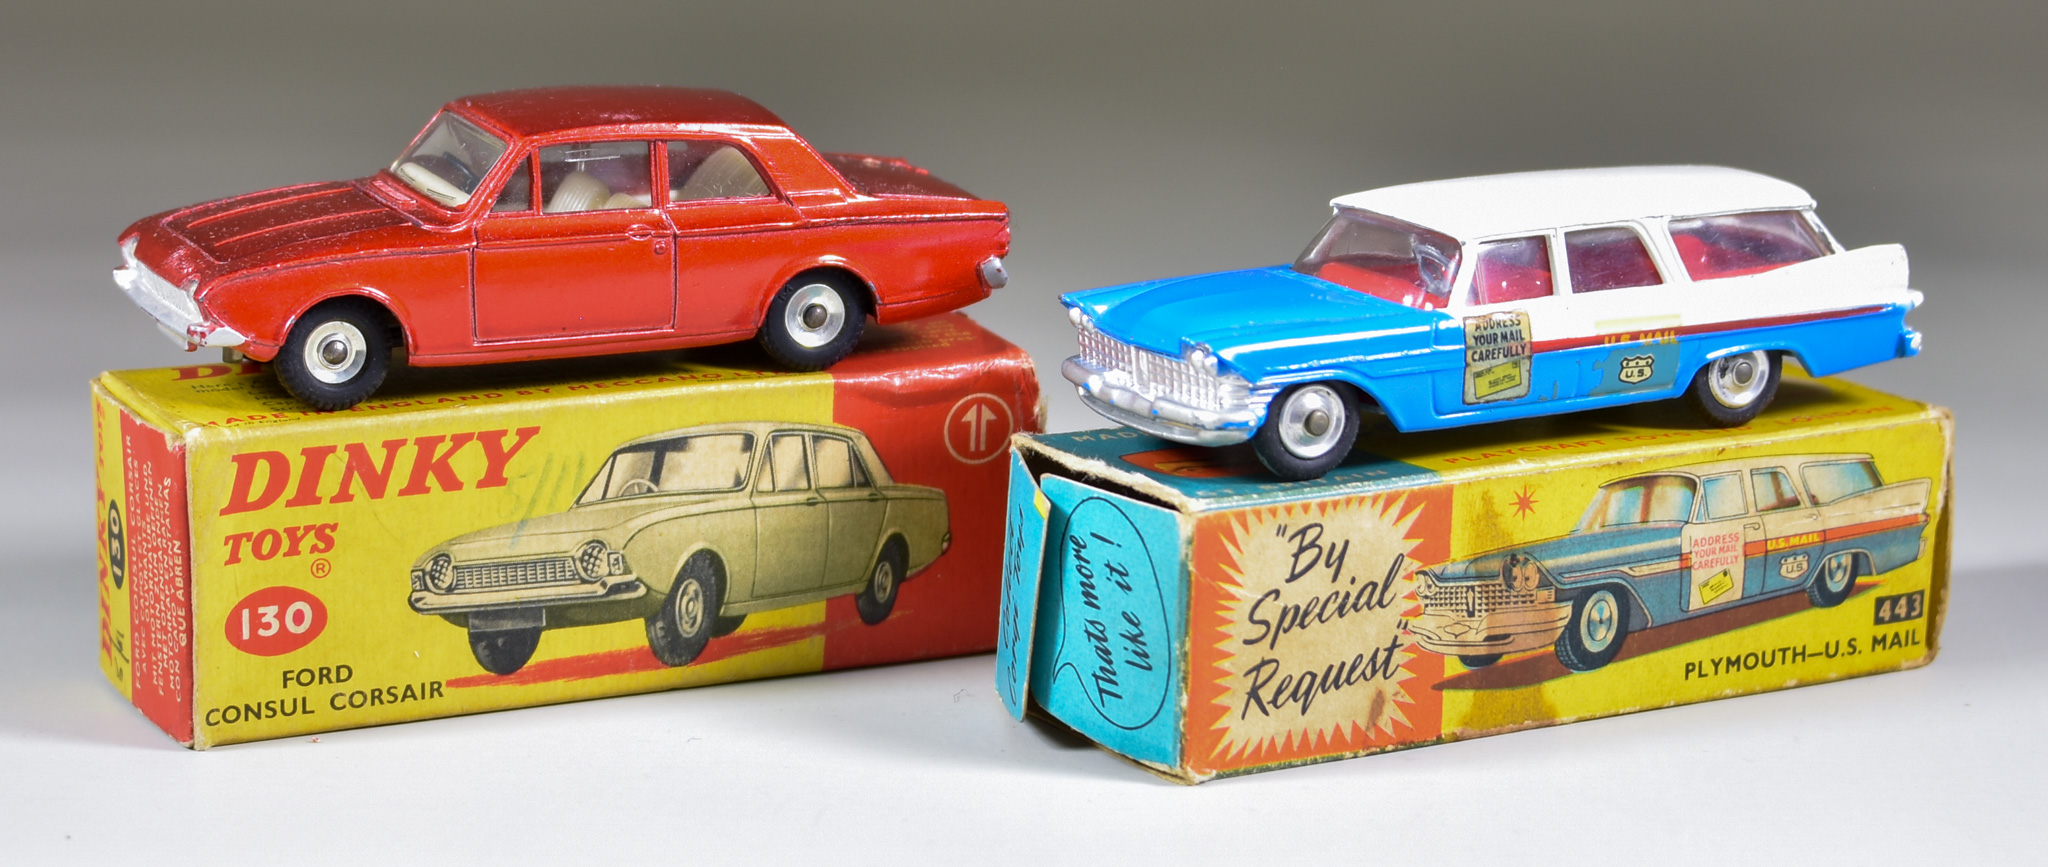 A Corgi Toys "Plymouth - US Mail", and a Dinky Toys No. 130 "Ford Consul Corsair"